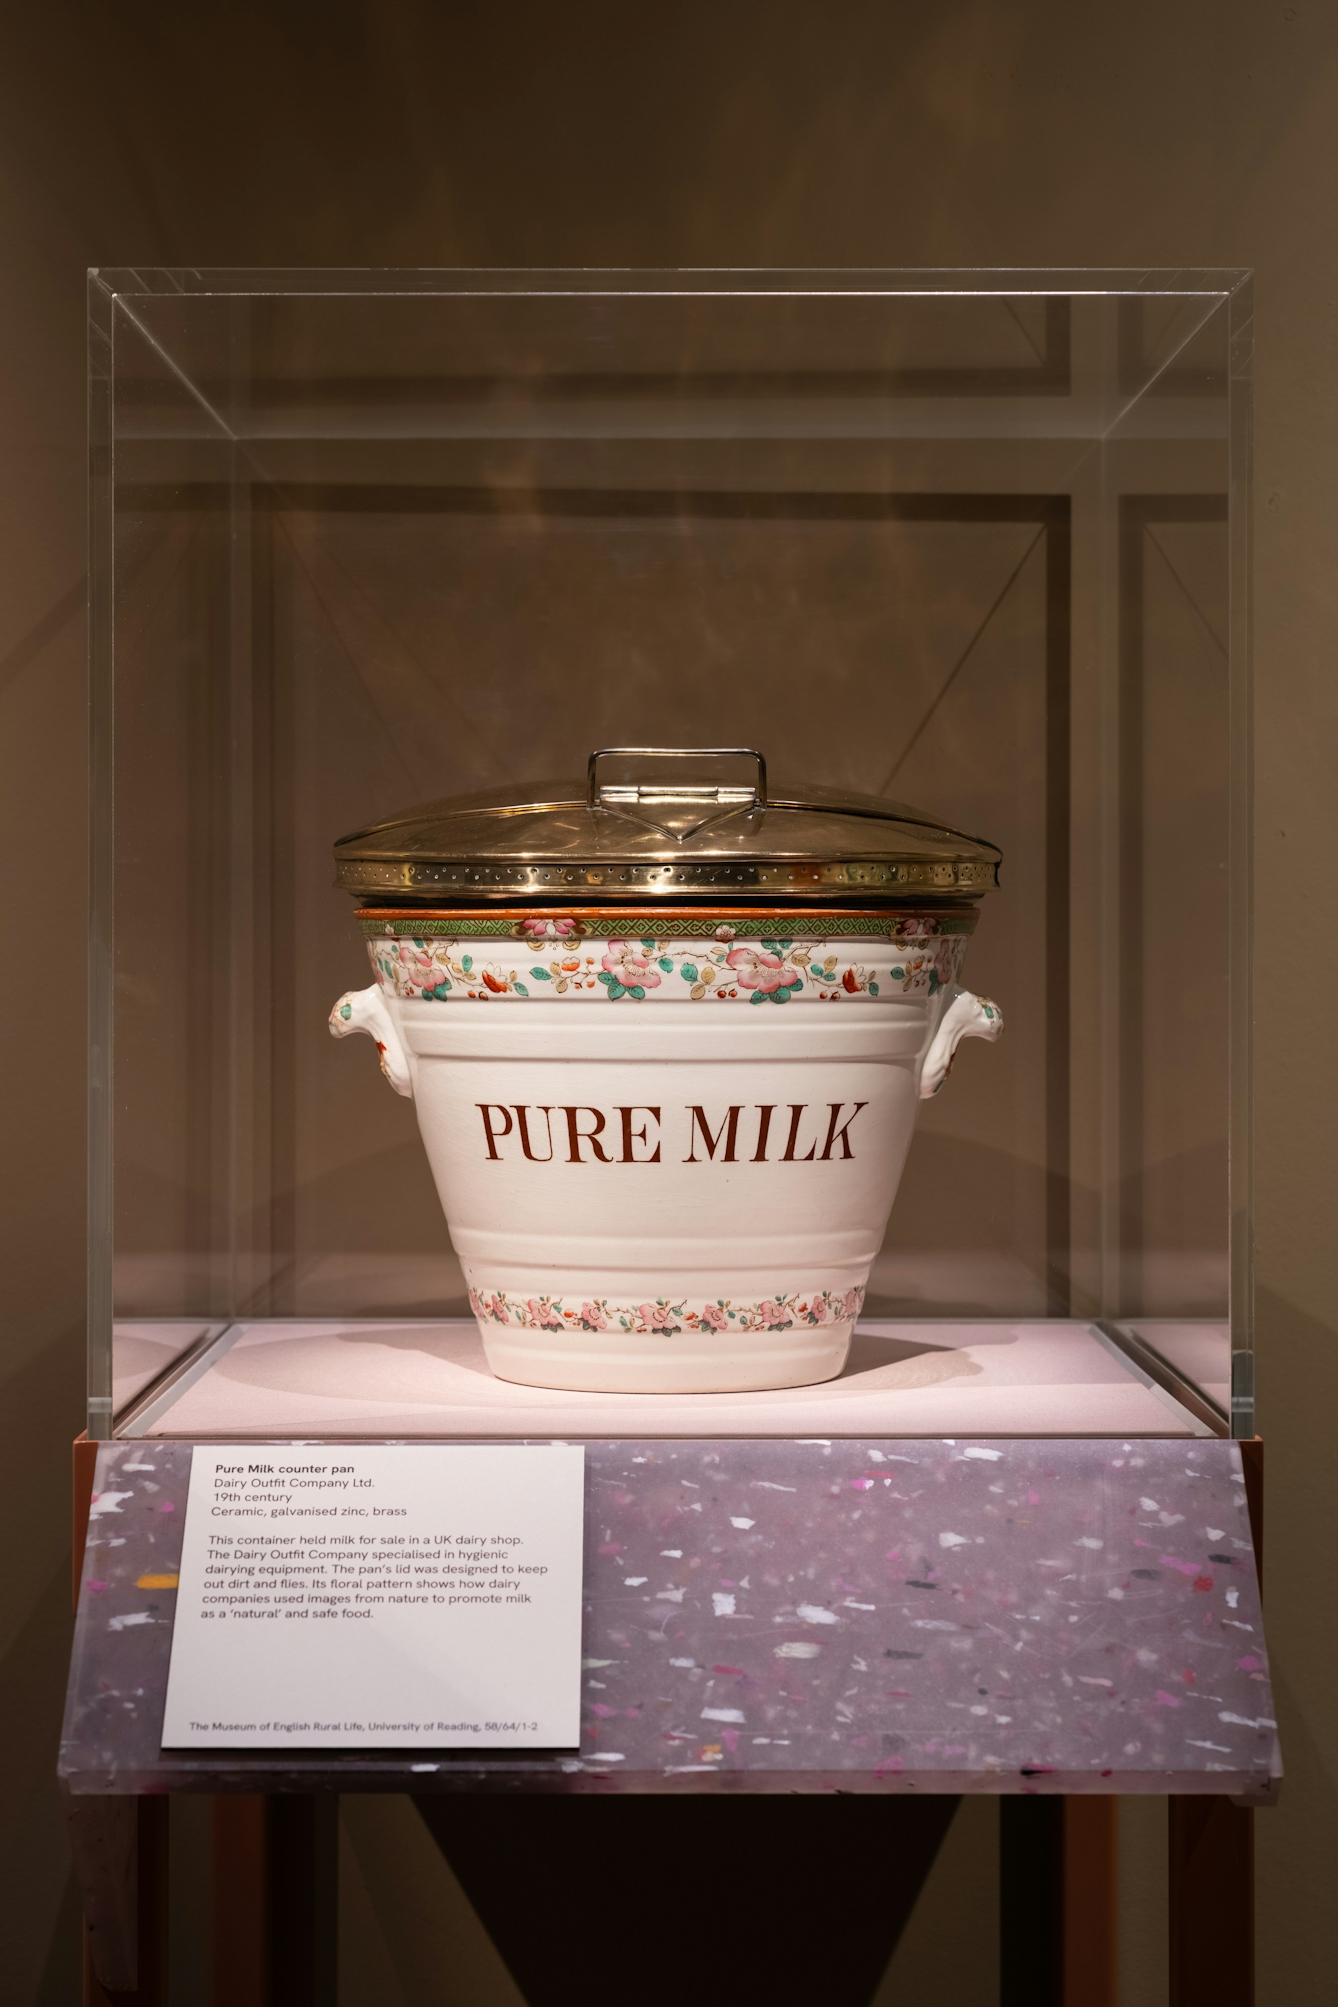 Photograph of a large ceramic milk counter pan with handles and metallic lid. 'Pure Milk' is written on the side of the pan. The pan is displayed in a perspex display case with a caption panel set on a recycled plastic plinth.